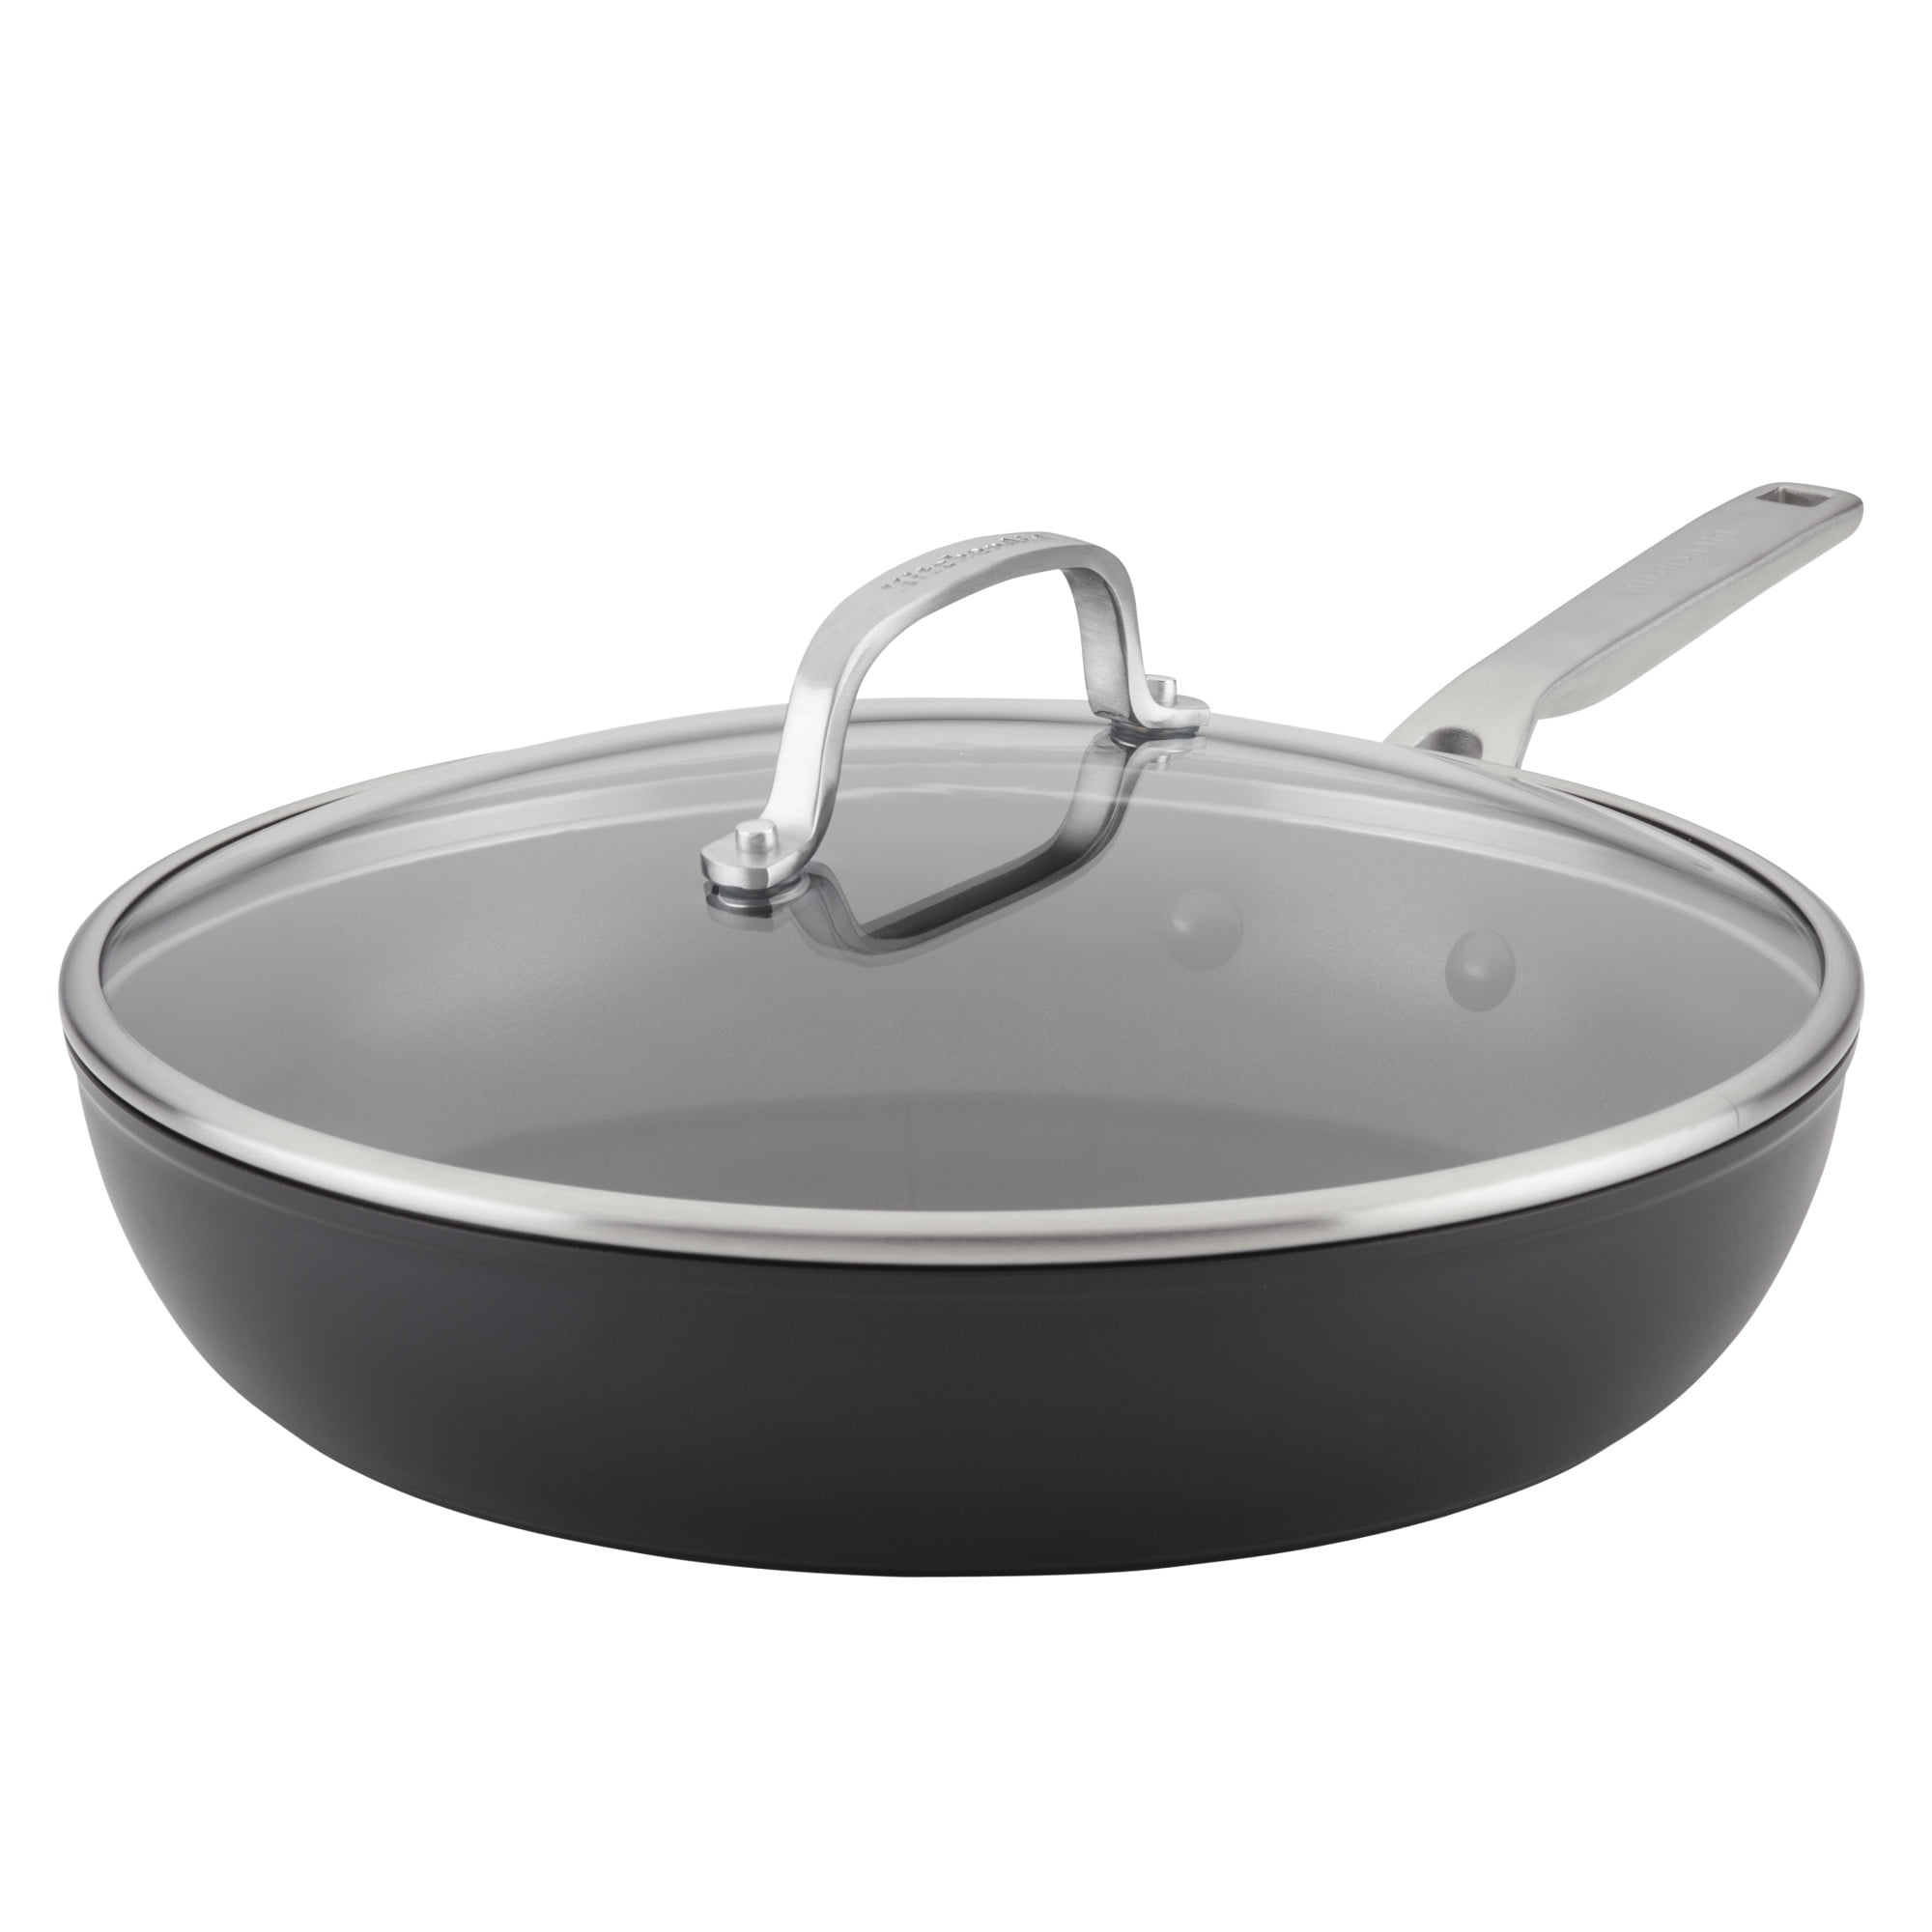 KitchenAid Hard Anodized Induction Nonstick Fry Pan/Skillet with Lid, 12.25 